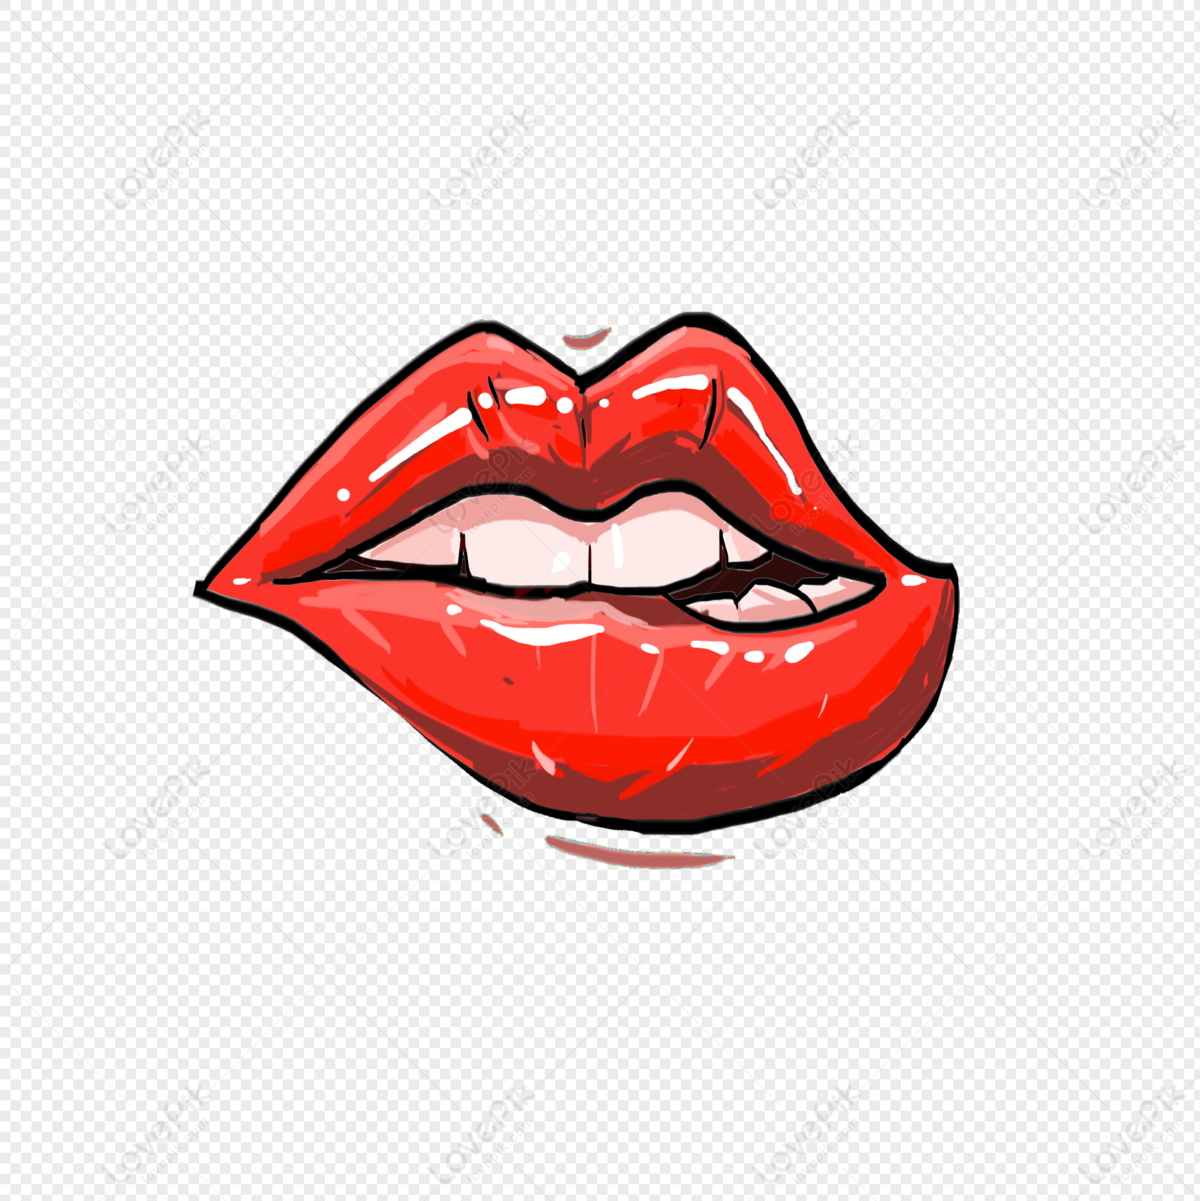 78 Lip Kiss Cartoon High Res Illustrations - Getty Images